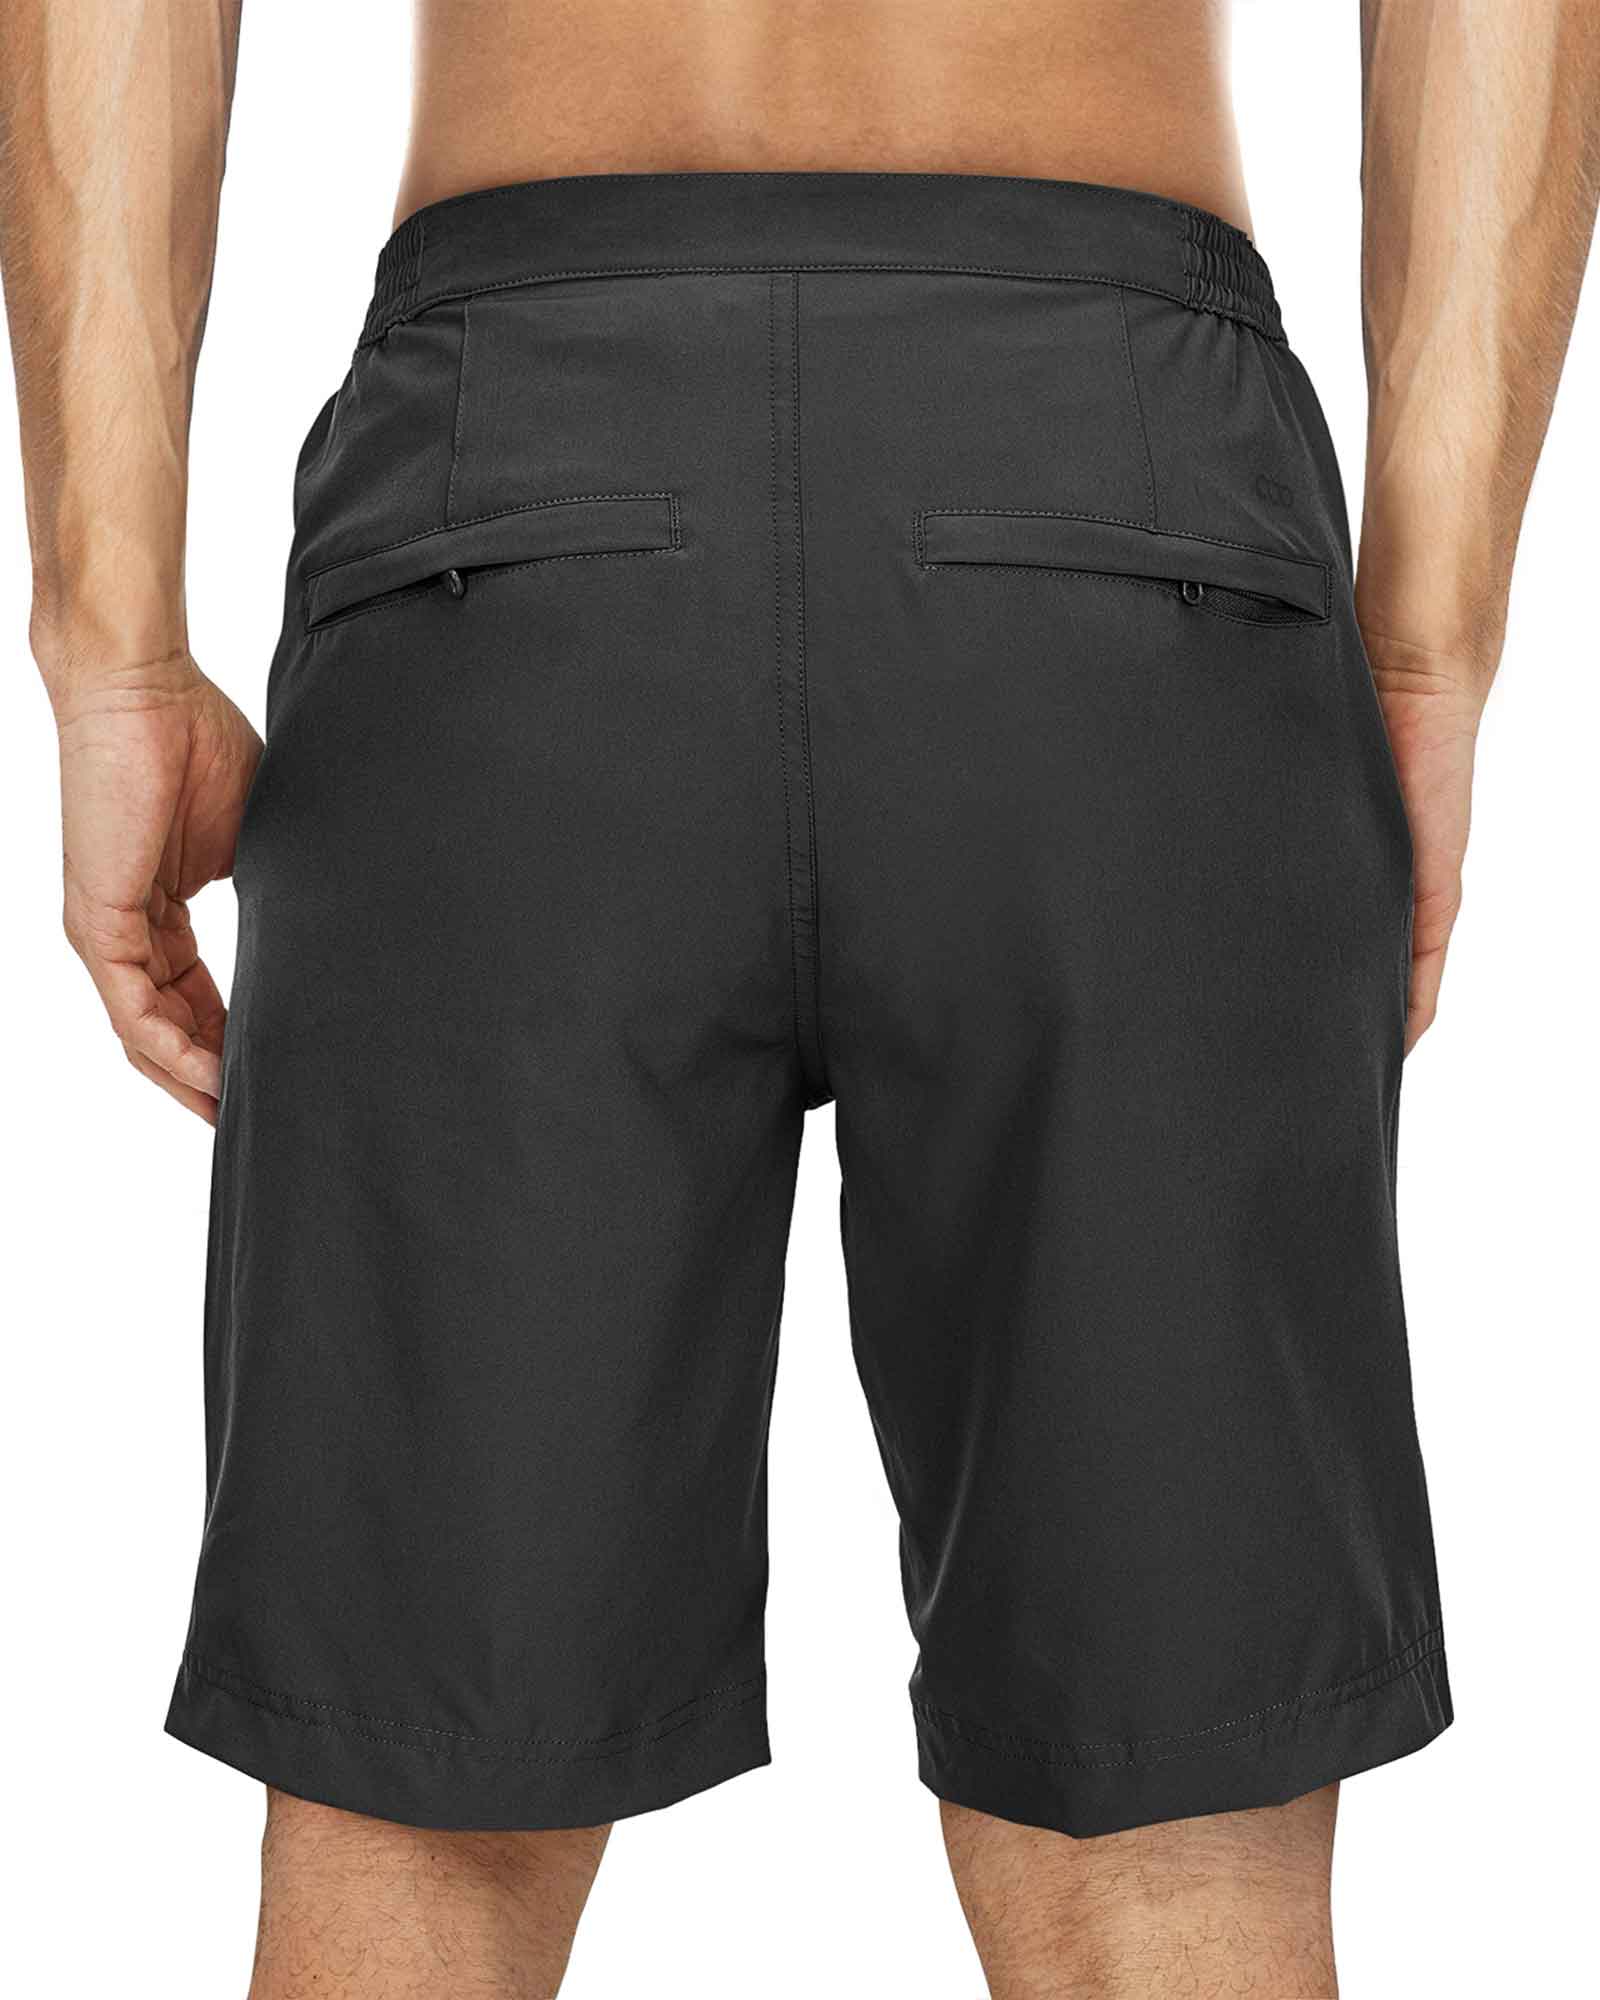 Men's Packable UPF50+ 9 Daily Shorts with 4 Pockets – 33,000ft